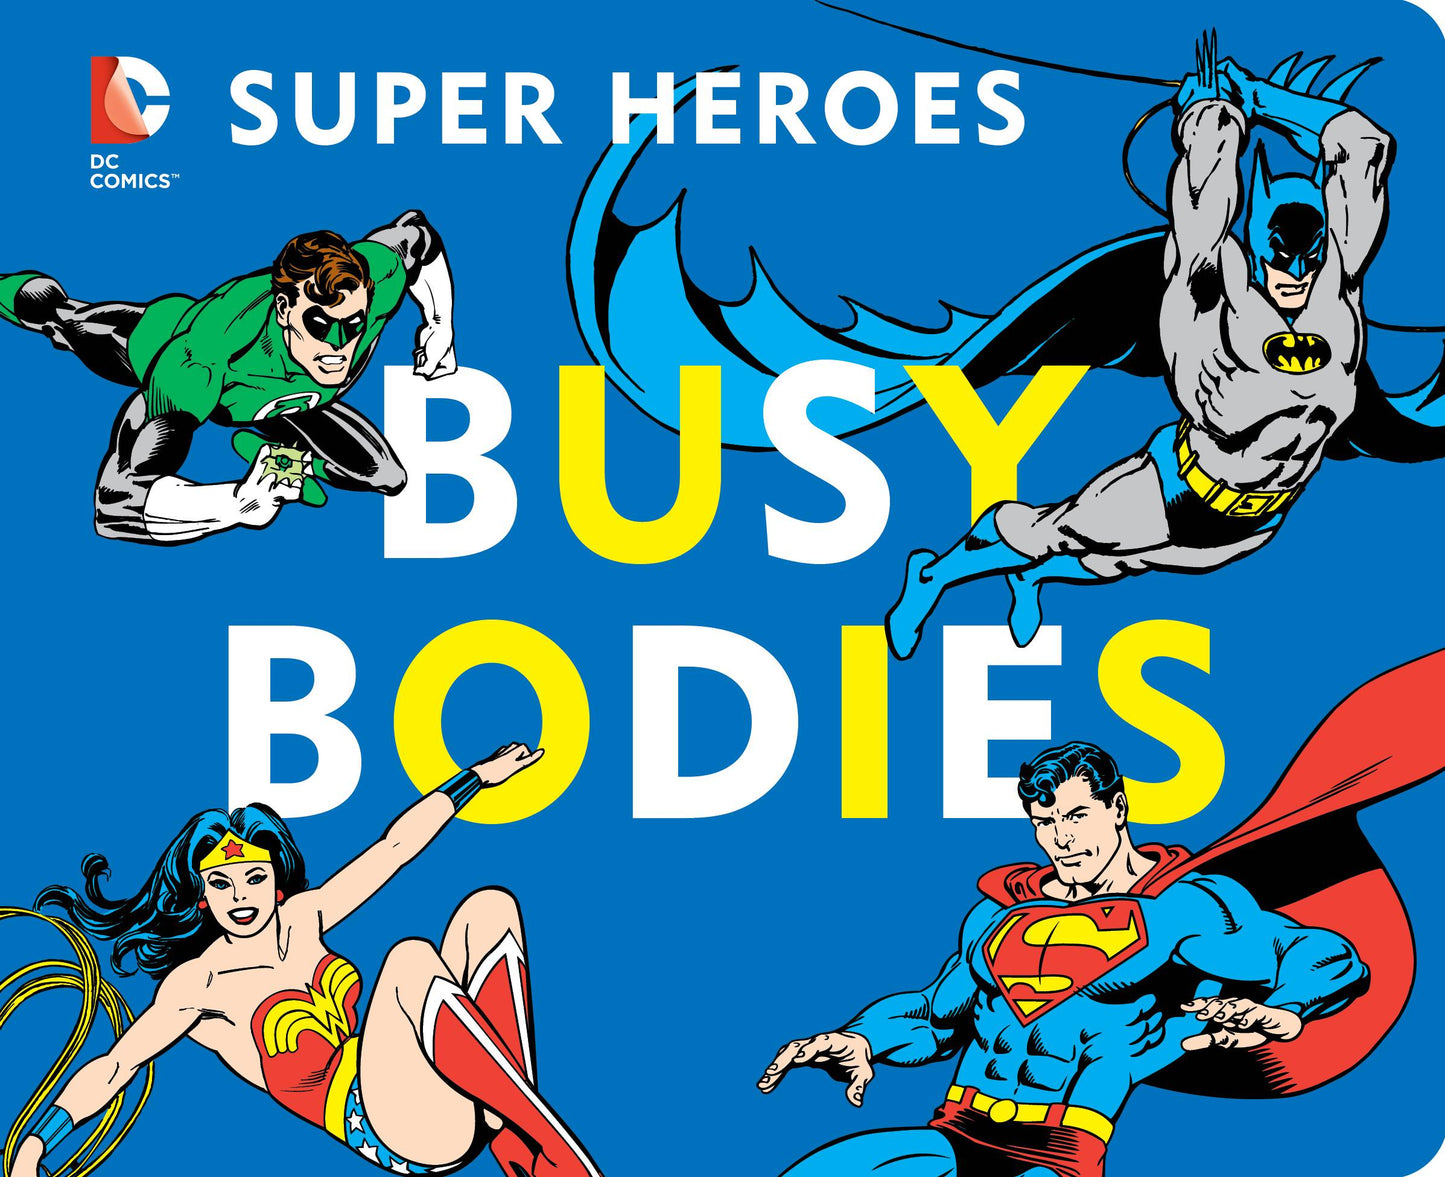 DC Super Heroes Busy Bodies Board Book